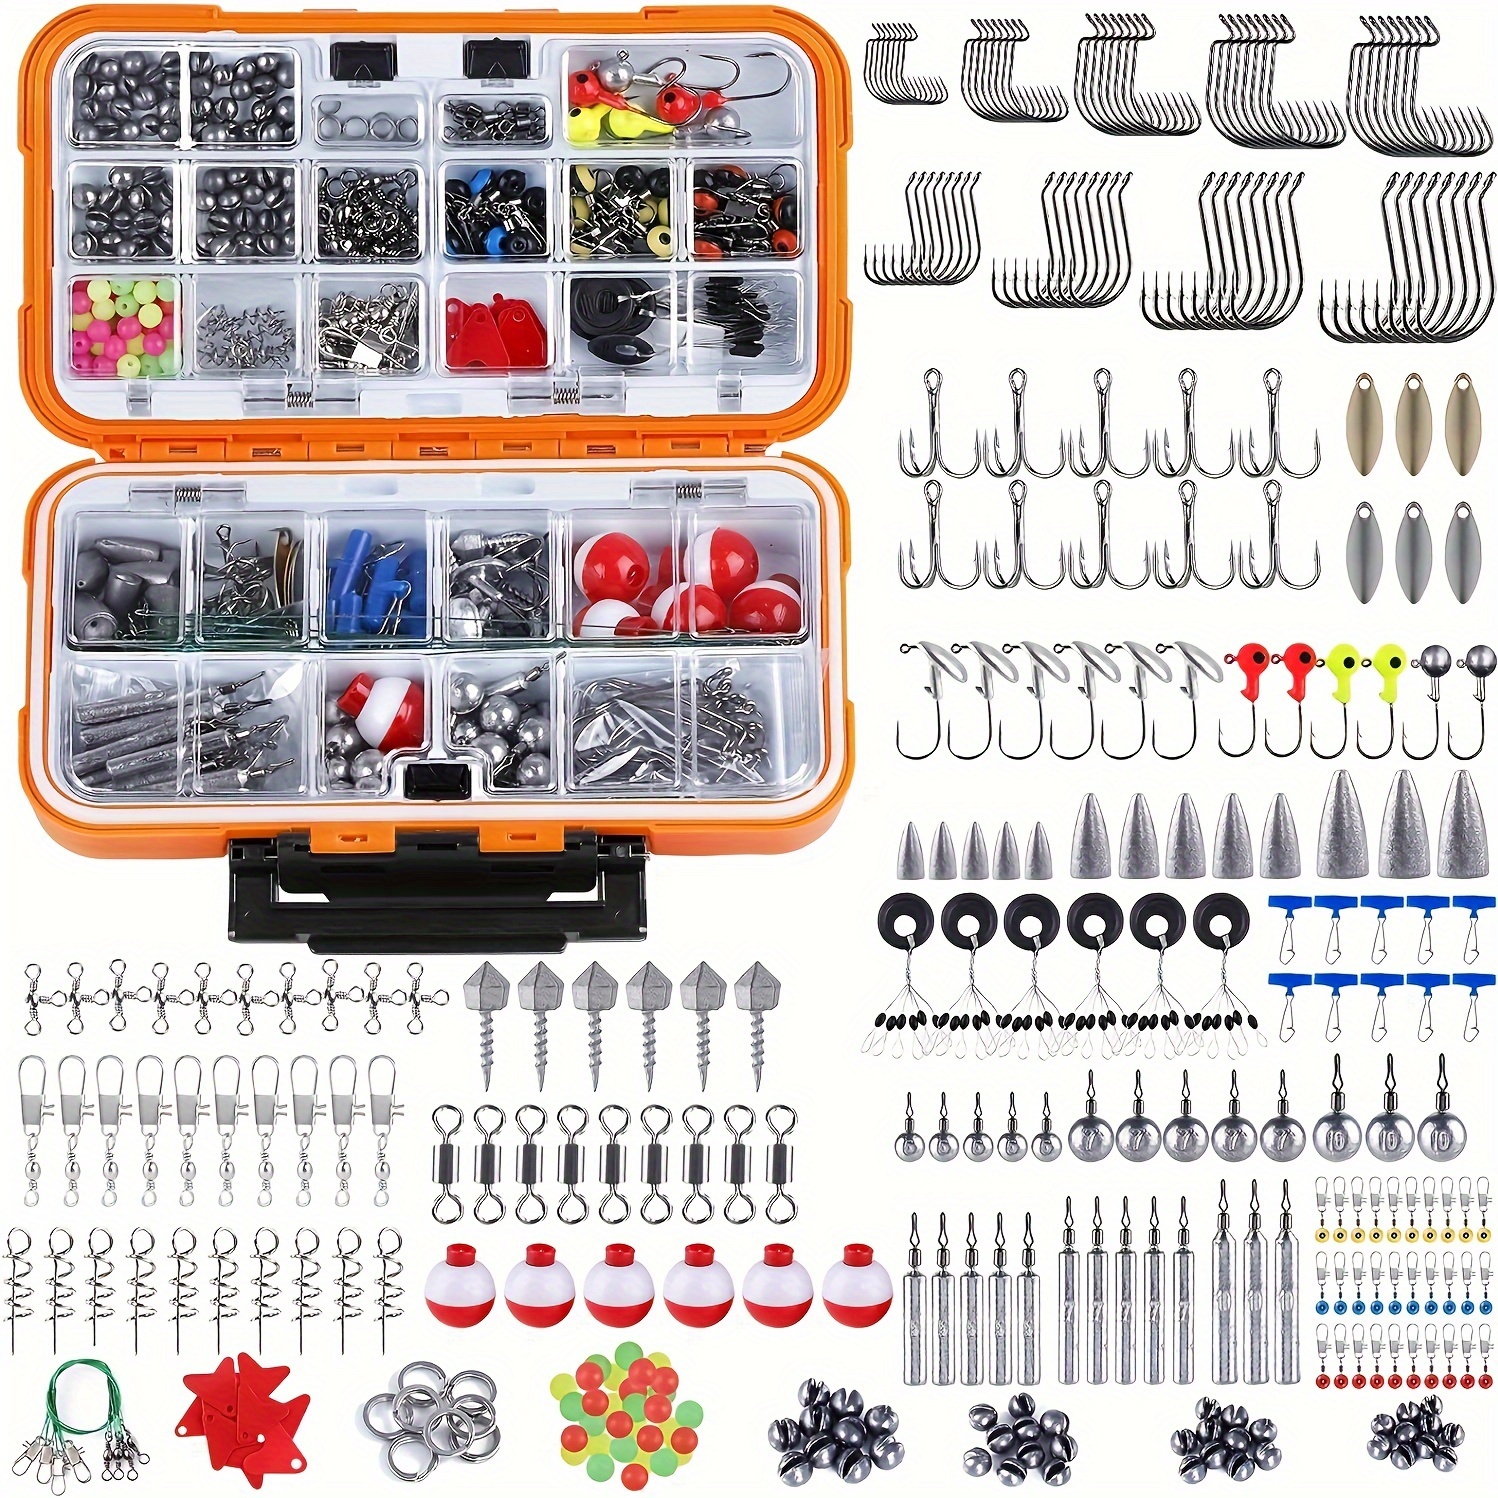 

Fishing Accessories Kit, 343pcs, Including Jig Hooks, Bullet Bass Casting Sinker Weights, Fishing Swivels Snaps, Sinker Slides, Fishing Set With Tackle Box